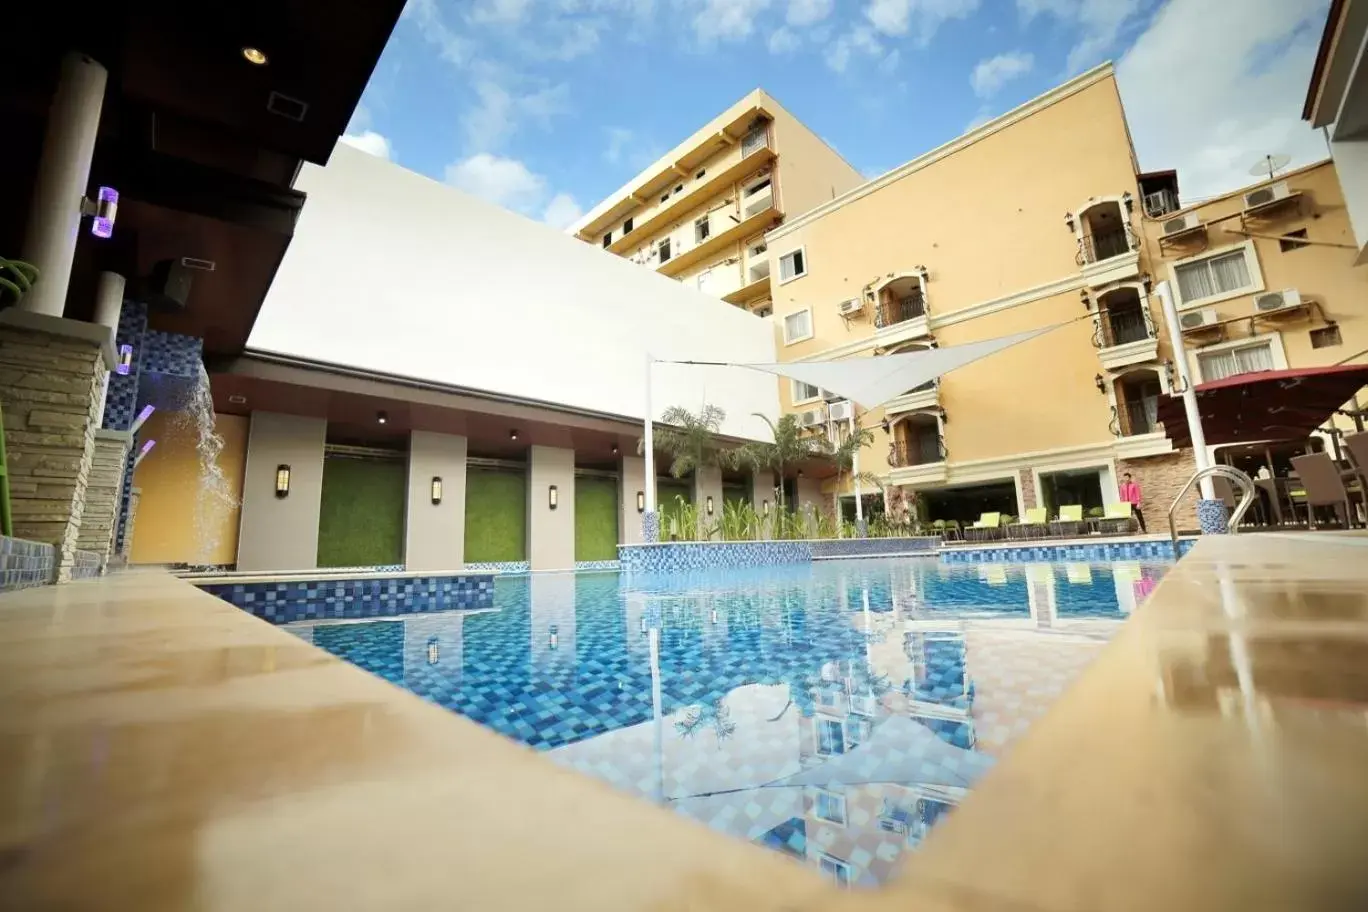 Swimming pool, Property Building in Villa Caceres Hotel